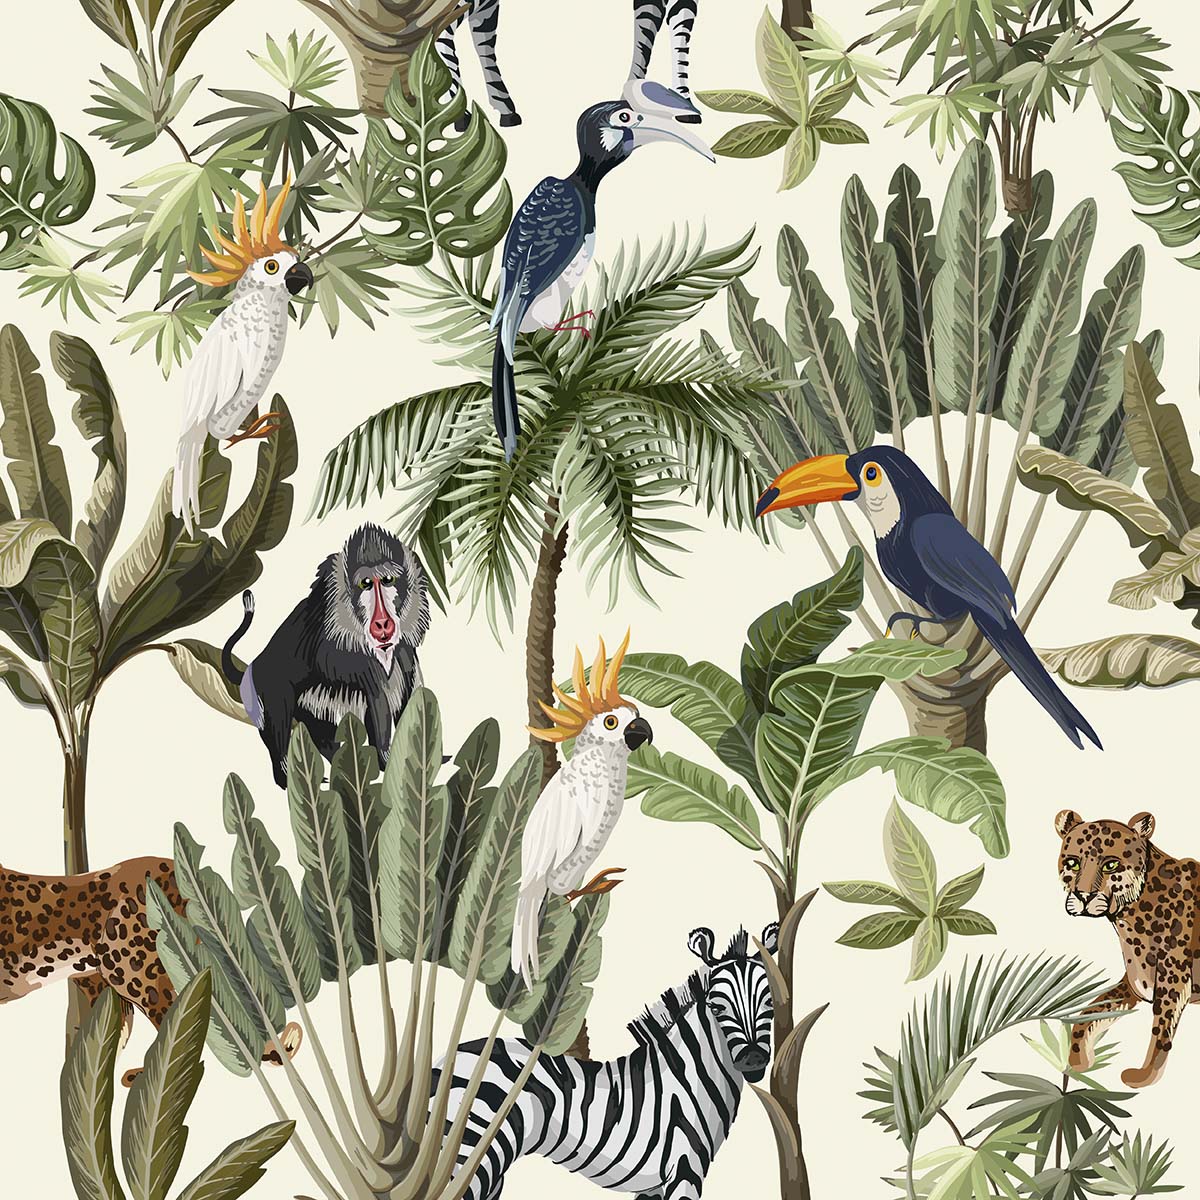 A wallpaper with tropical plants and birds